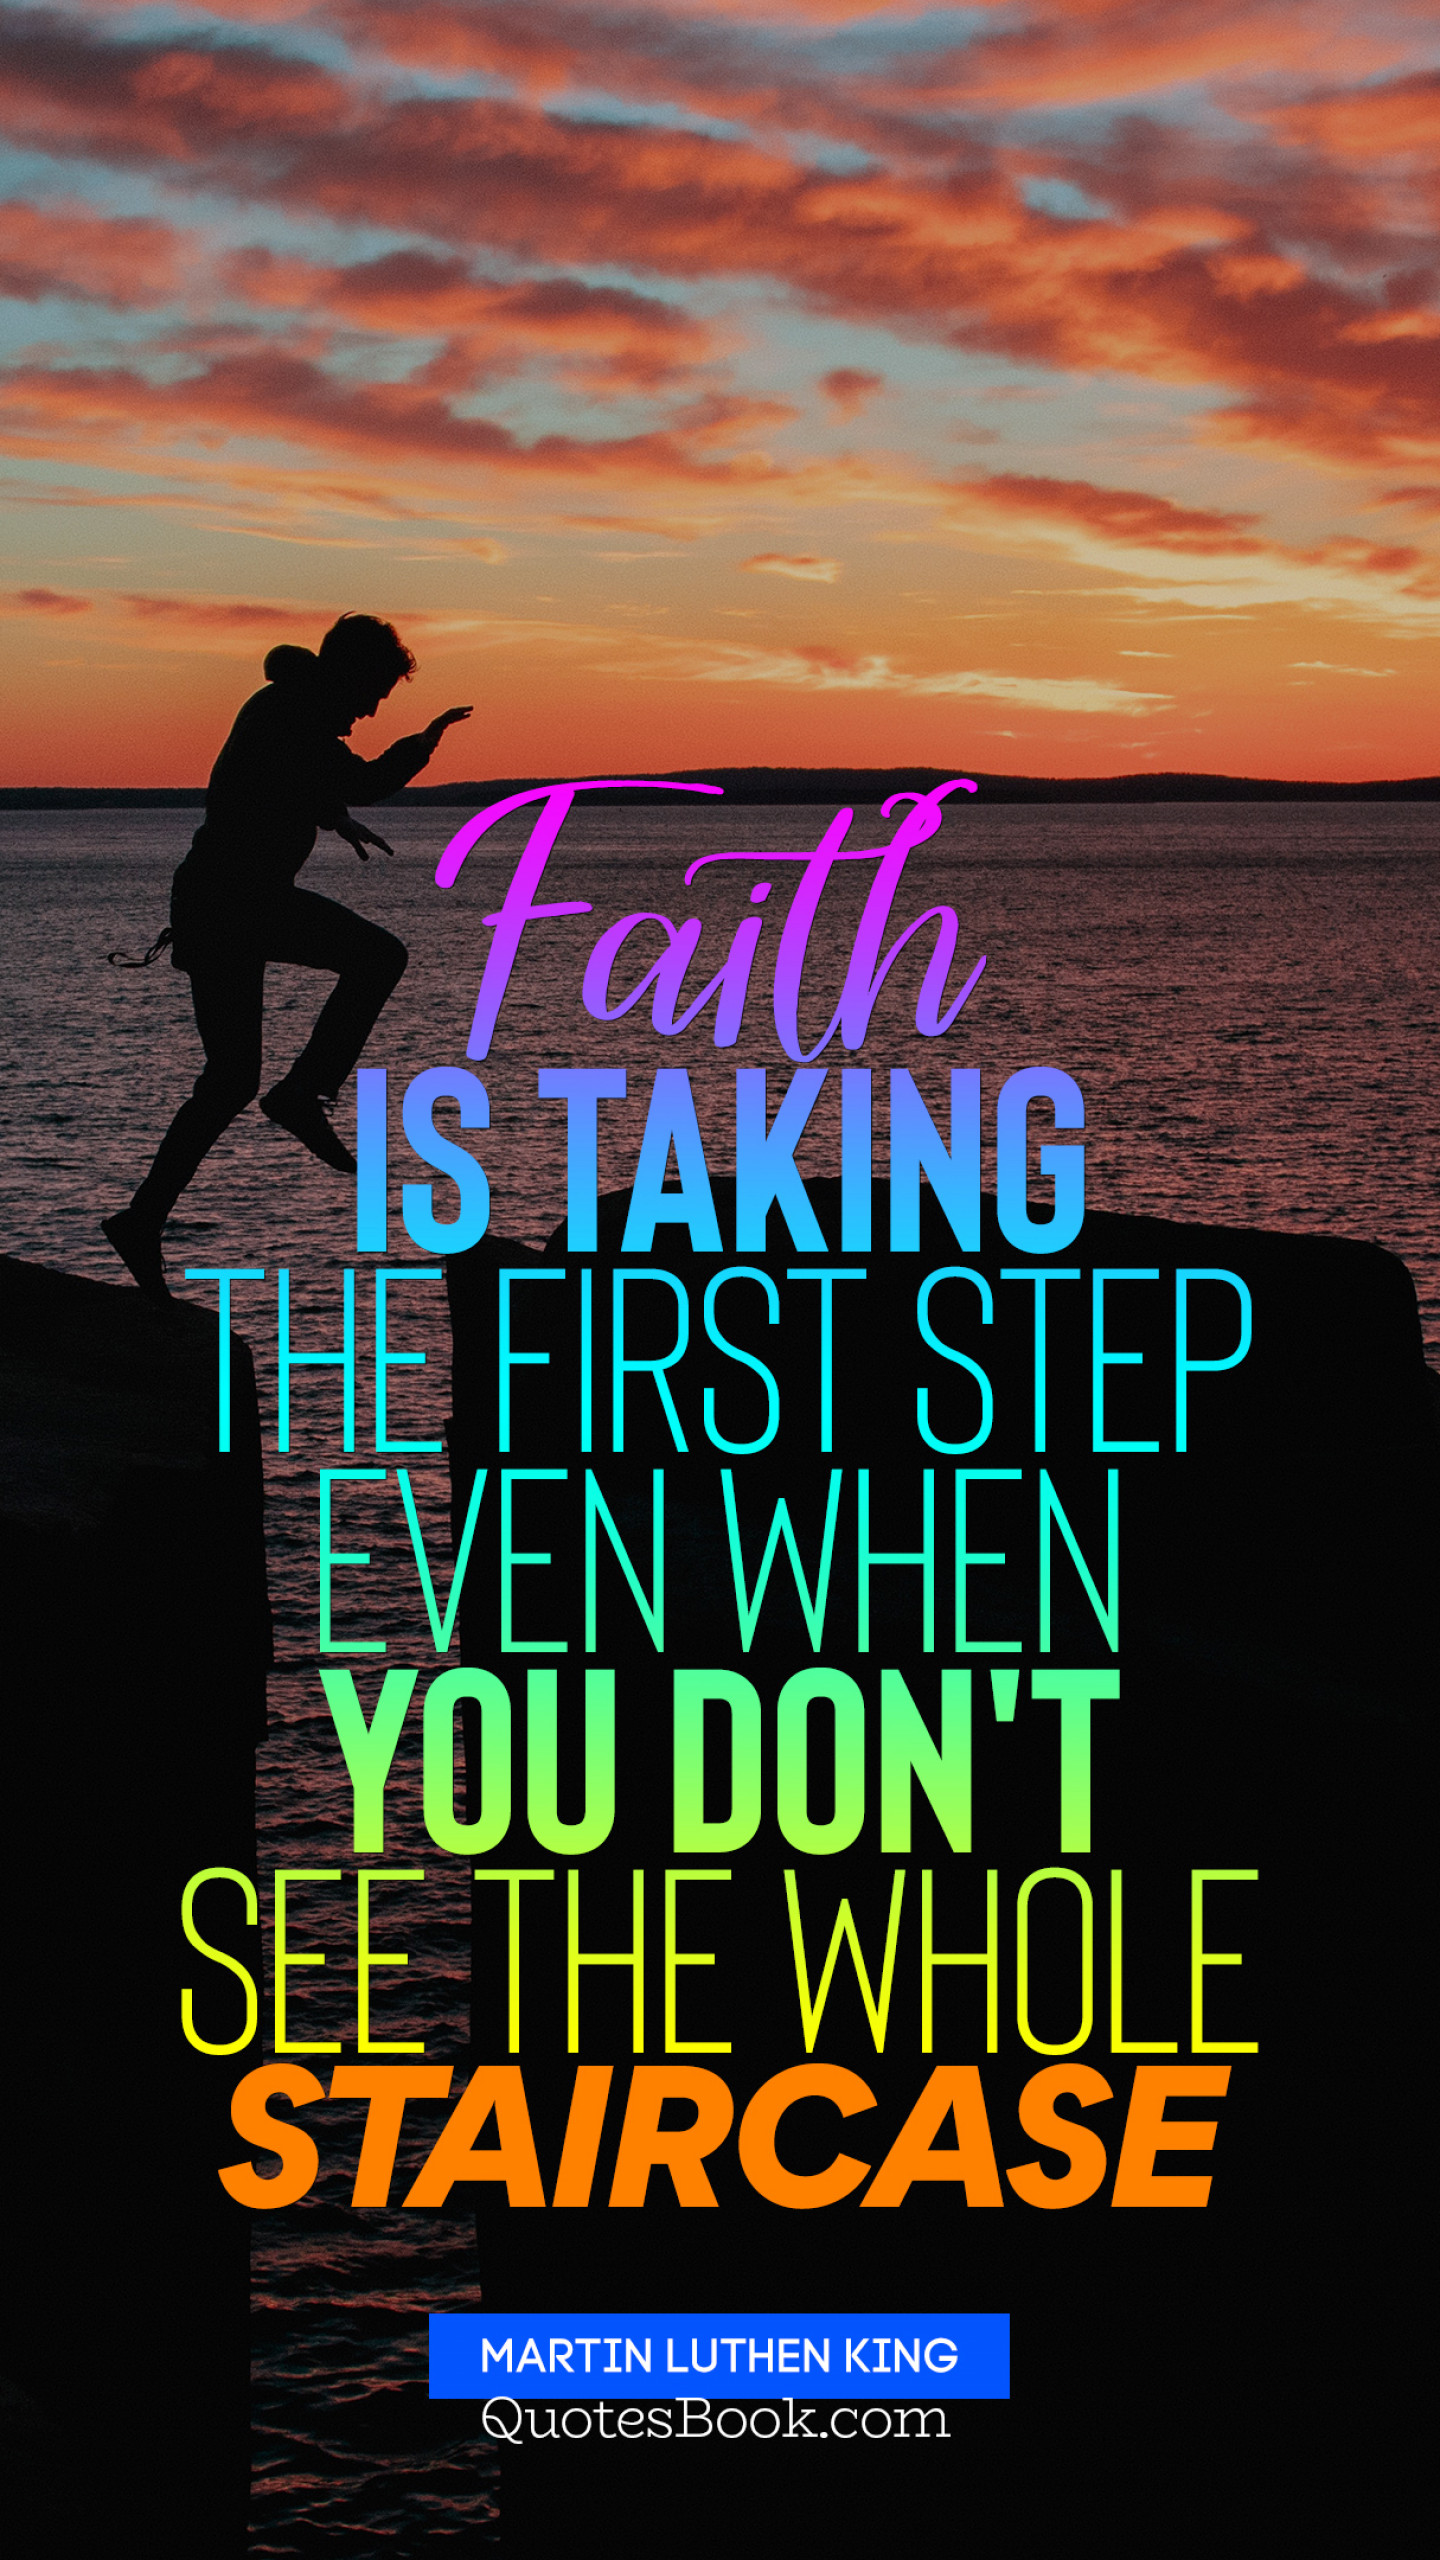 Faith is taking the first step even when you don't see the whole